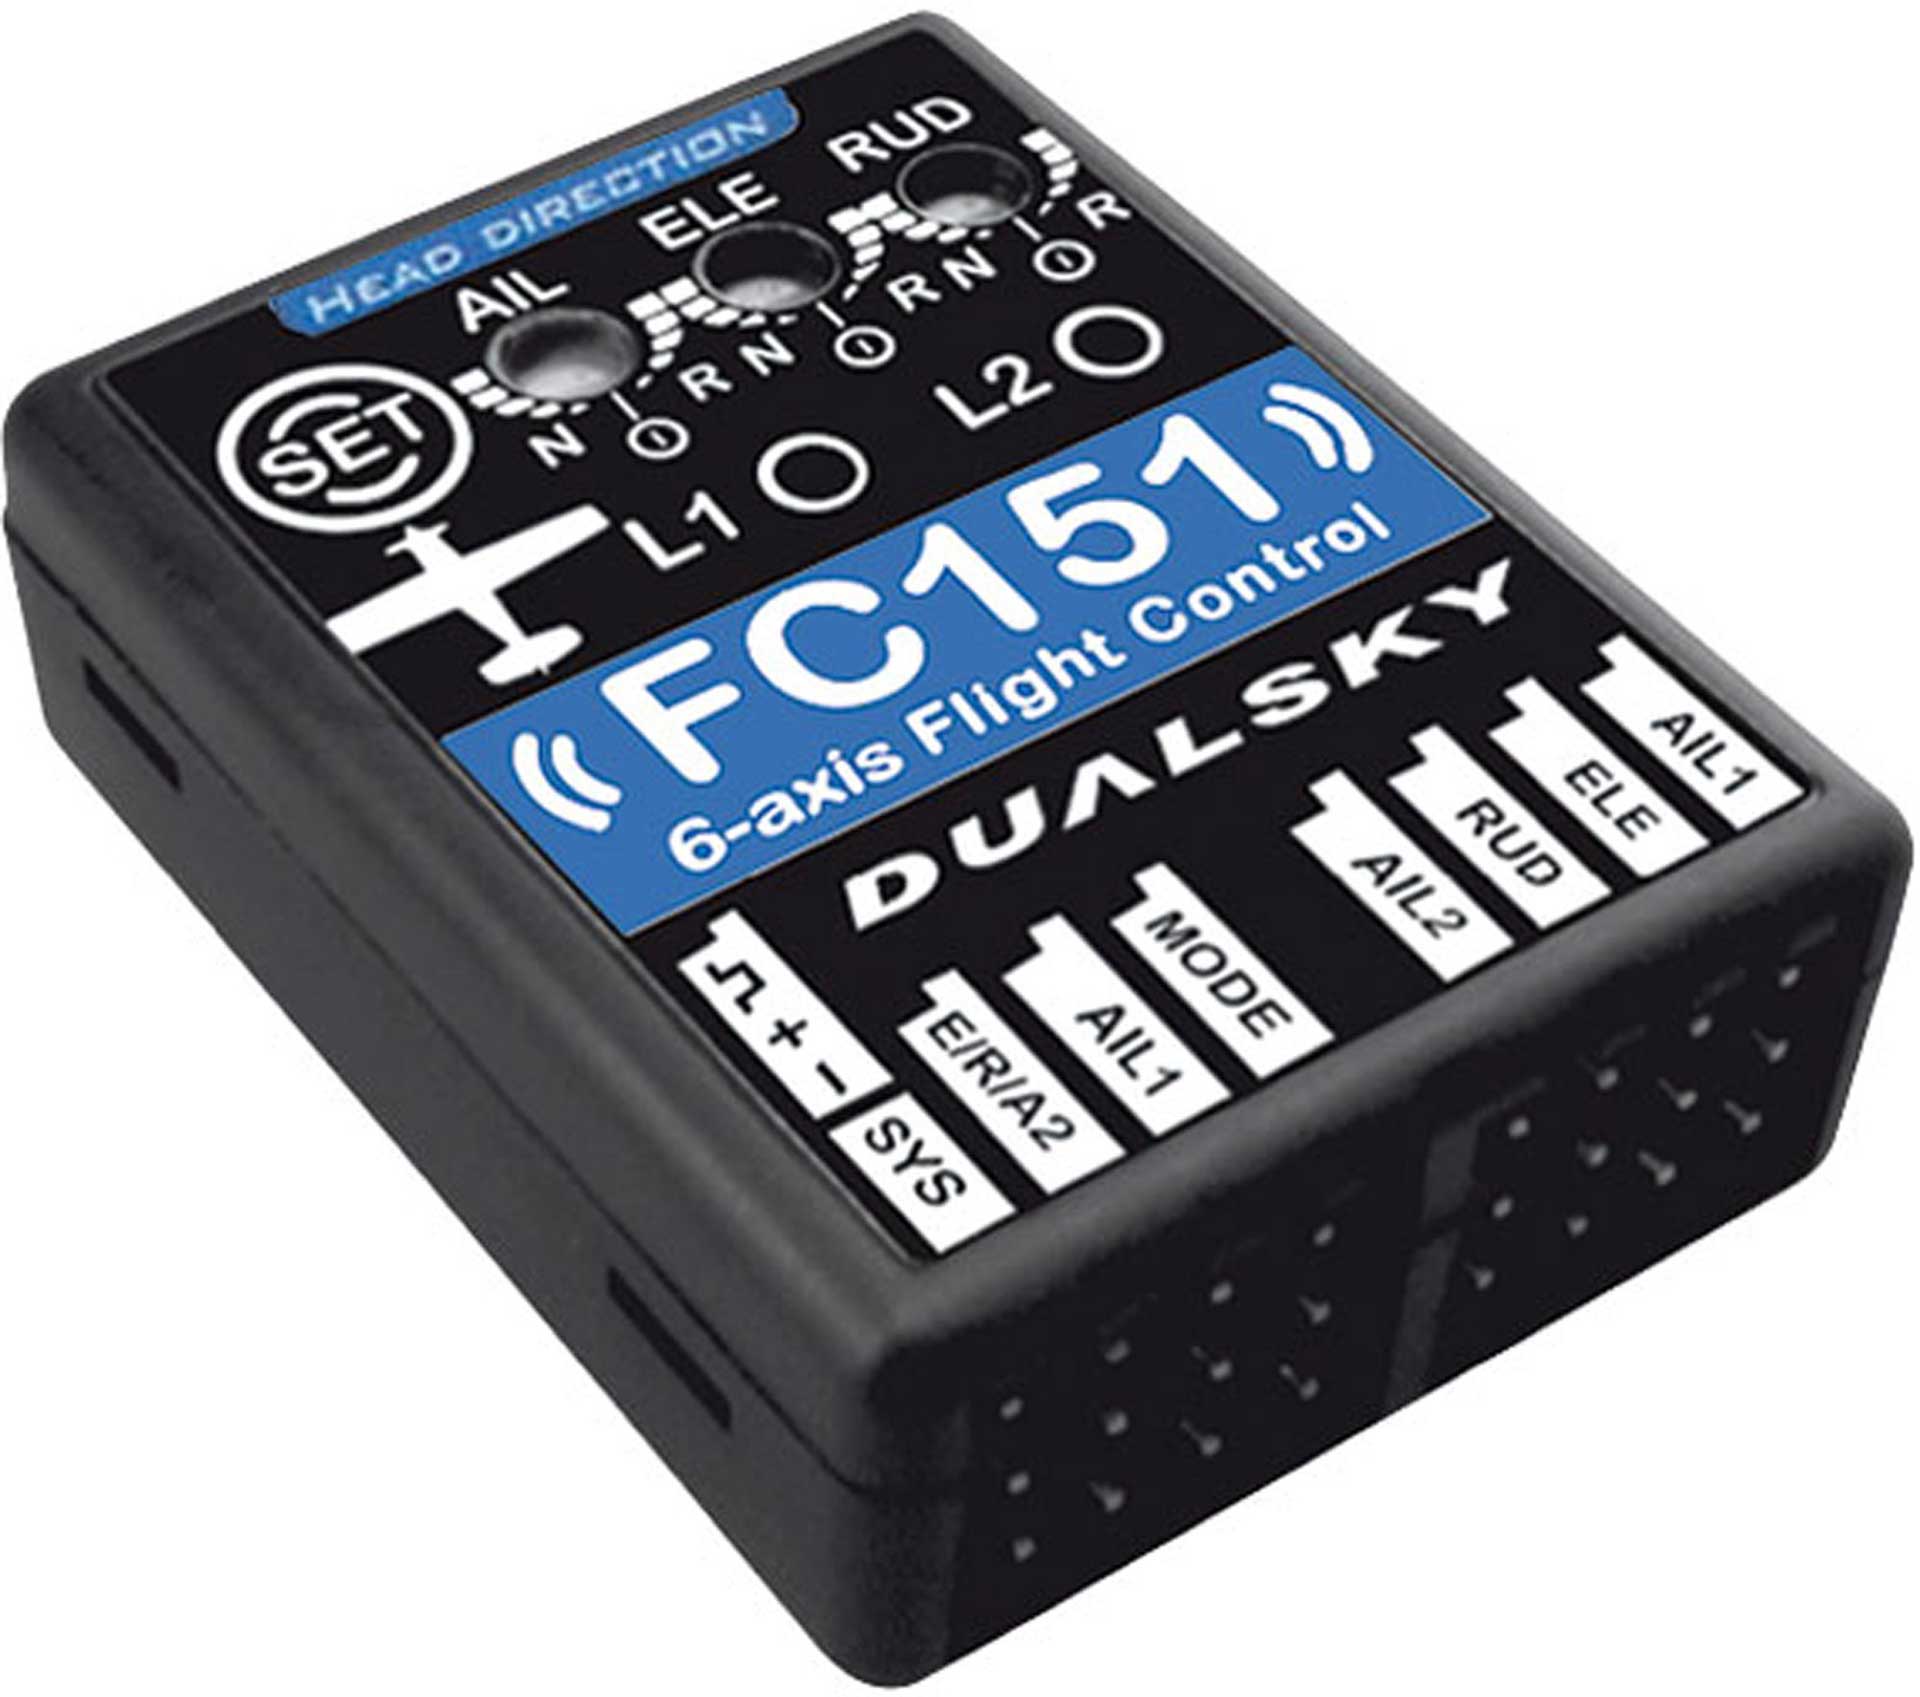 DUALSKY FC151 3-AXIS SURFACES GYRO, AUTO LEVEL AND 3-AXIS ACCELEROMETER